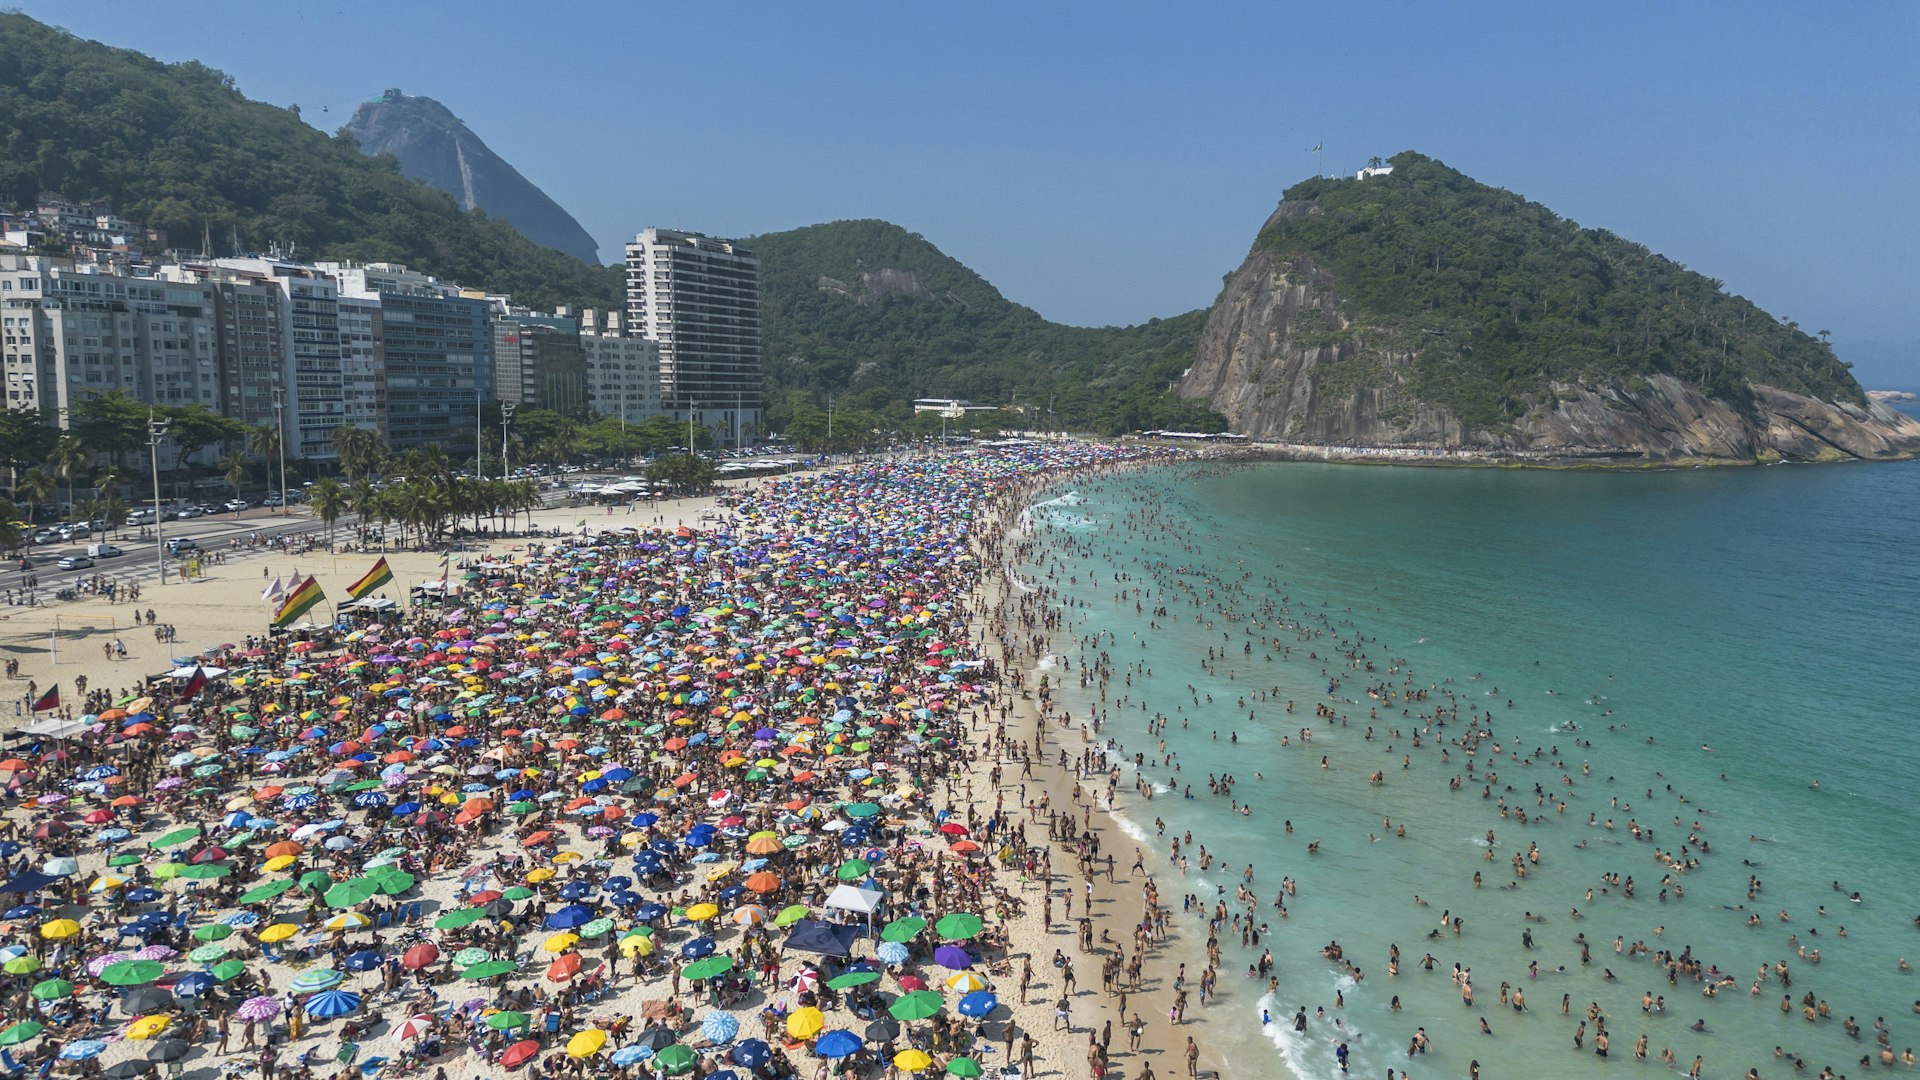 A crowded beach packed with people taking shade under colorful umbrellas